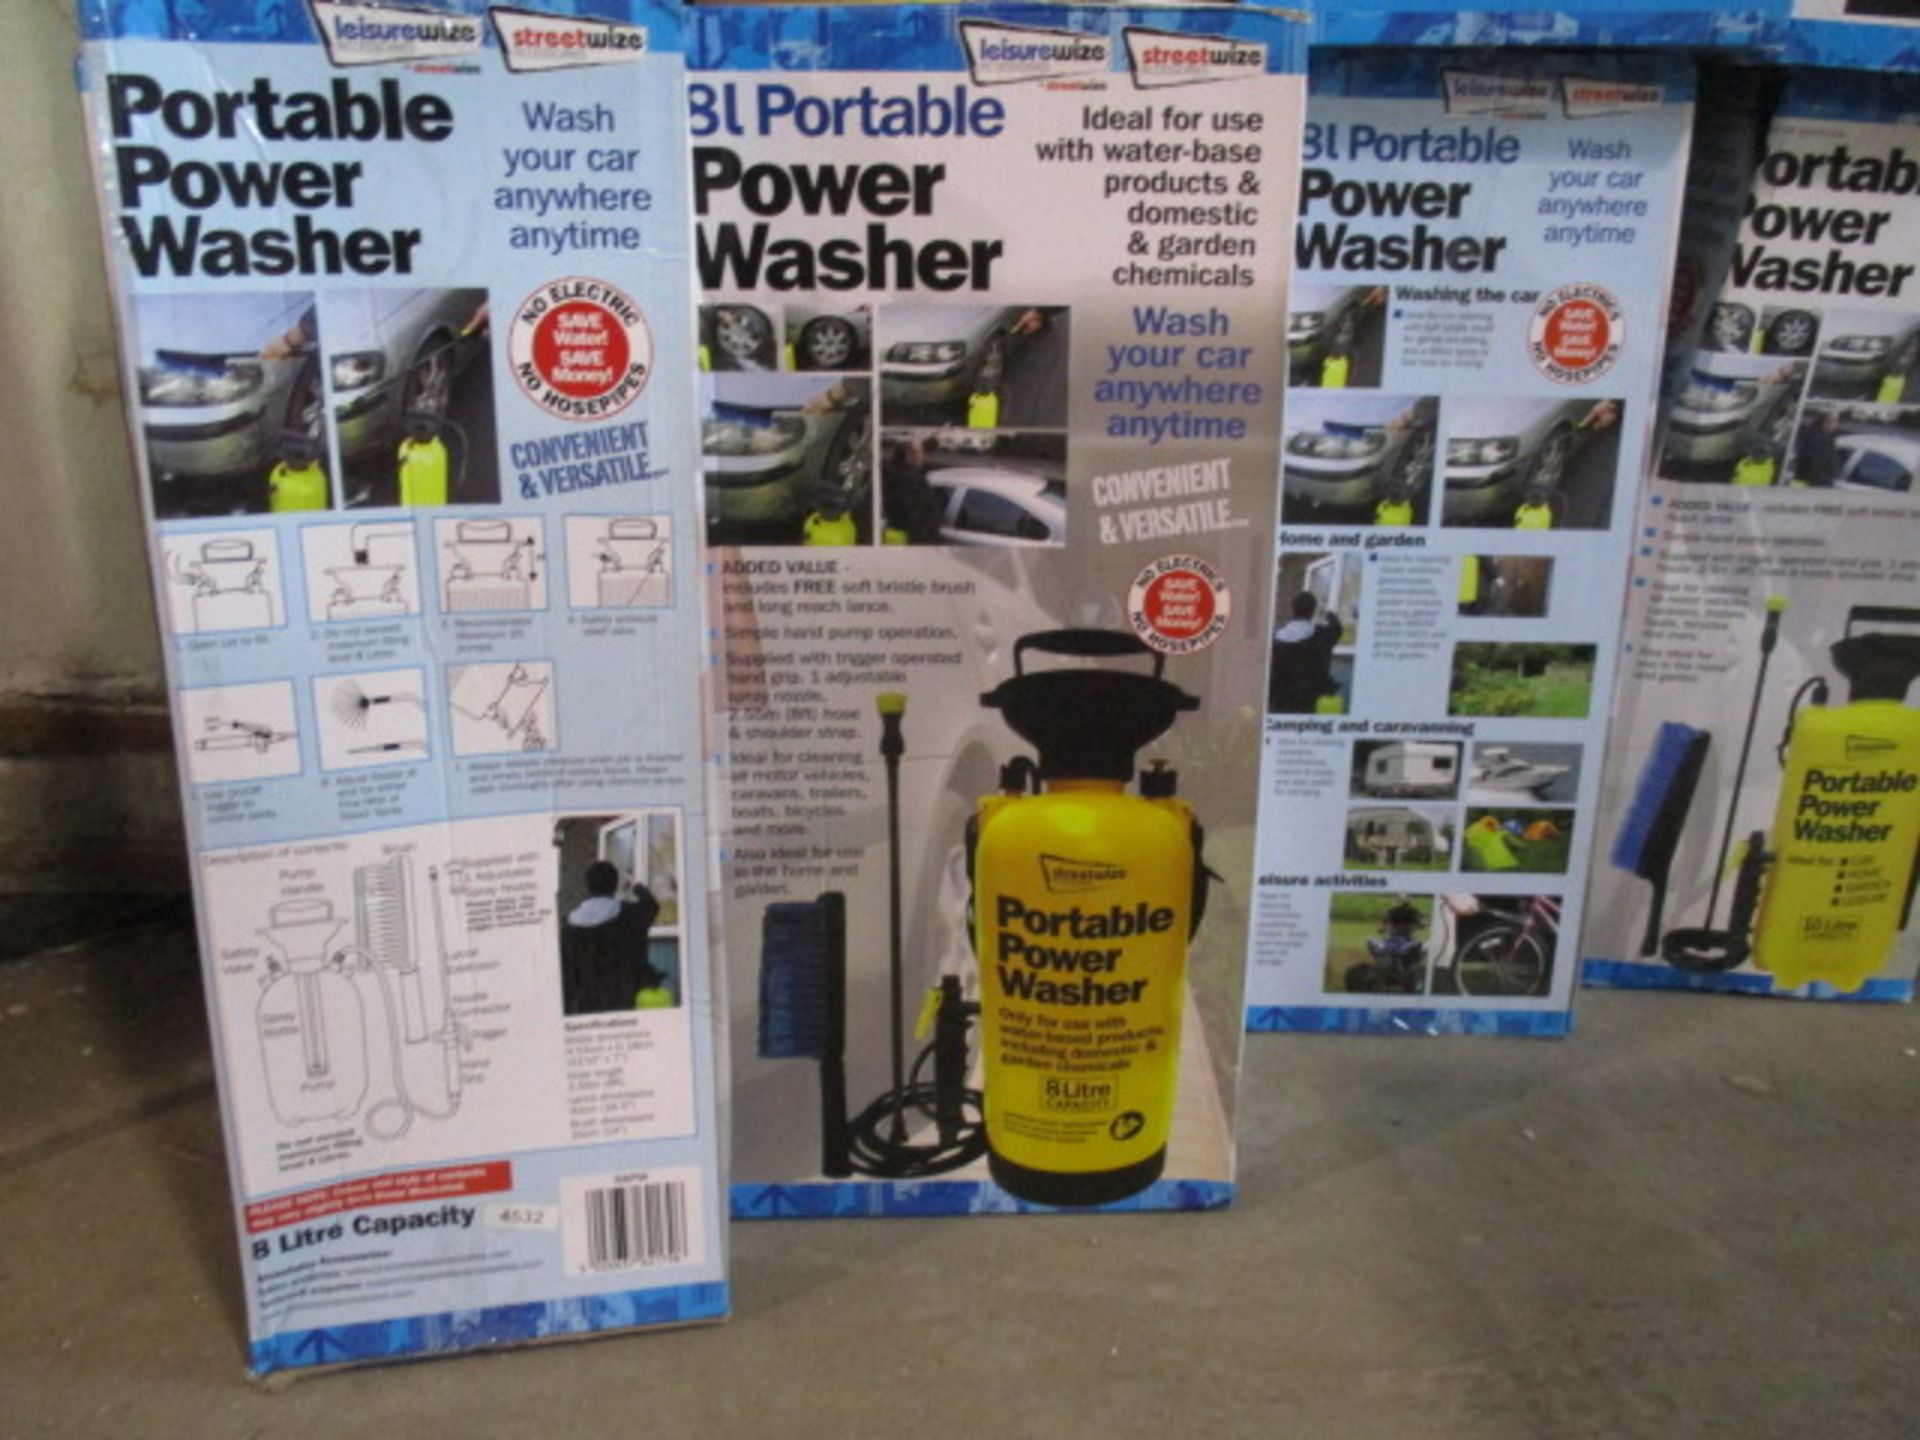 Portawash wash system boxed rrp £19.99 . Will be selected at random from stock 8l or 10l - Lot is